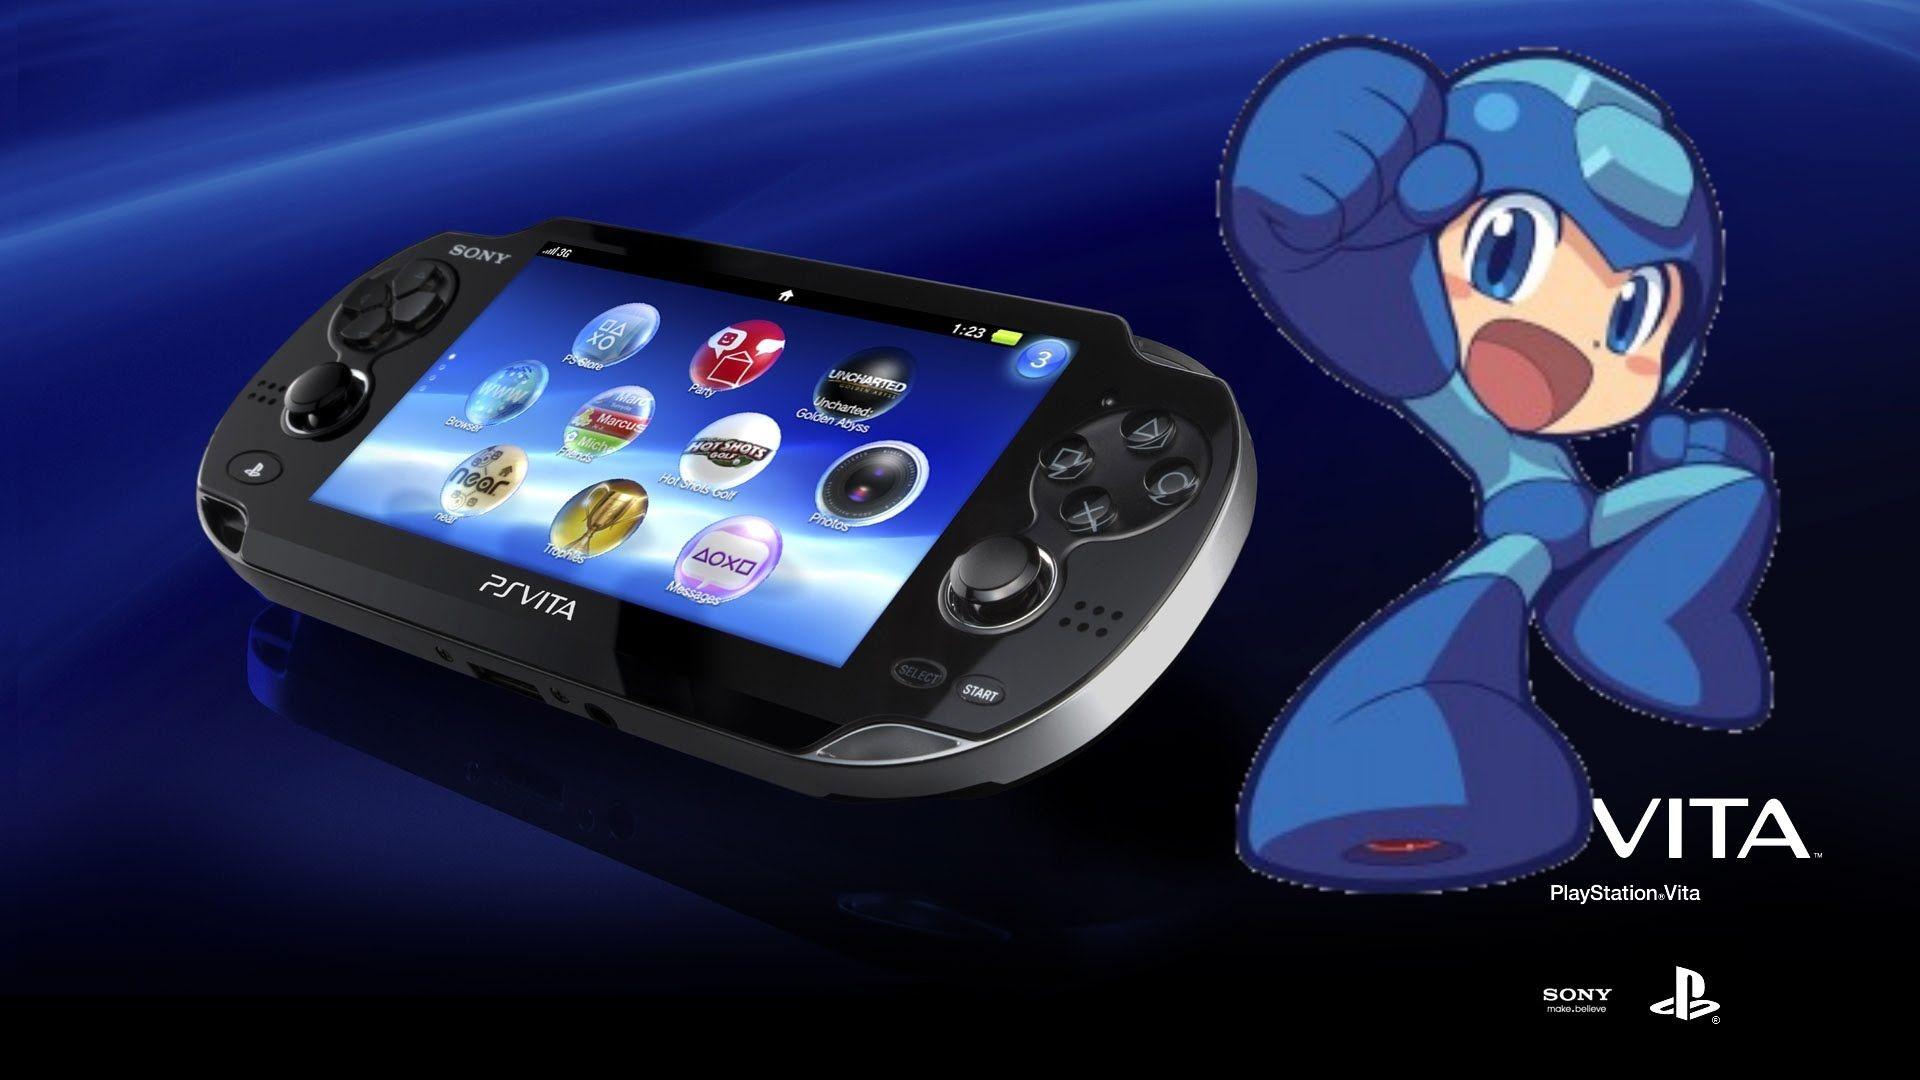 How To Play Any PSP Game On PS Vita (Mega Man Powered Up)